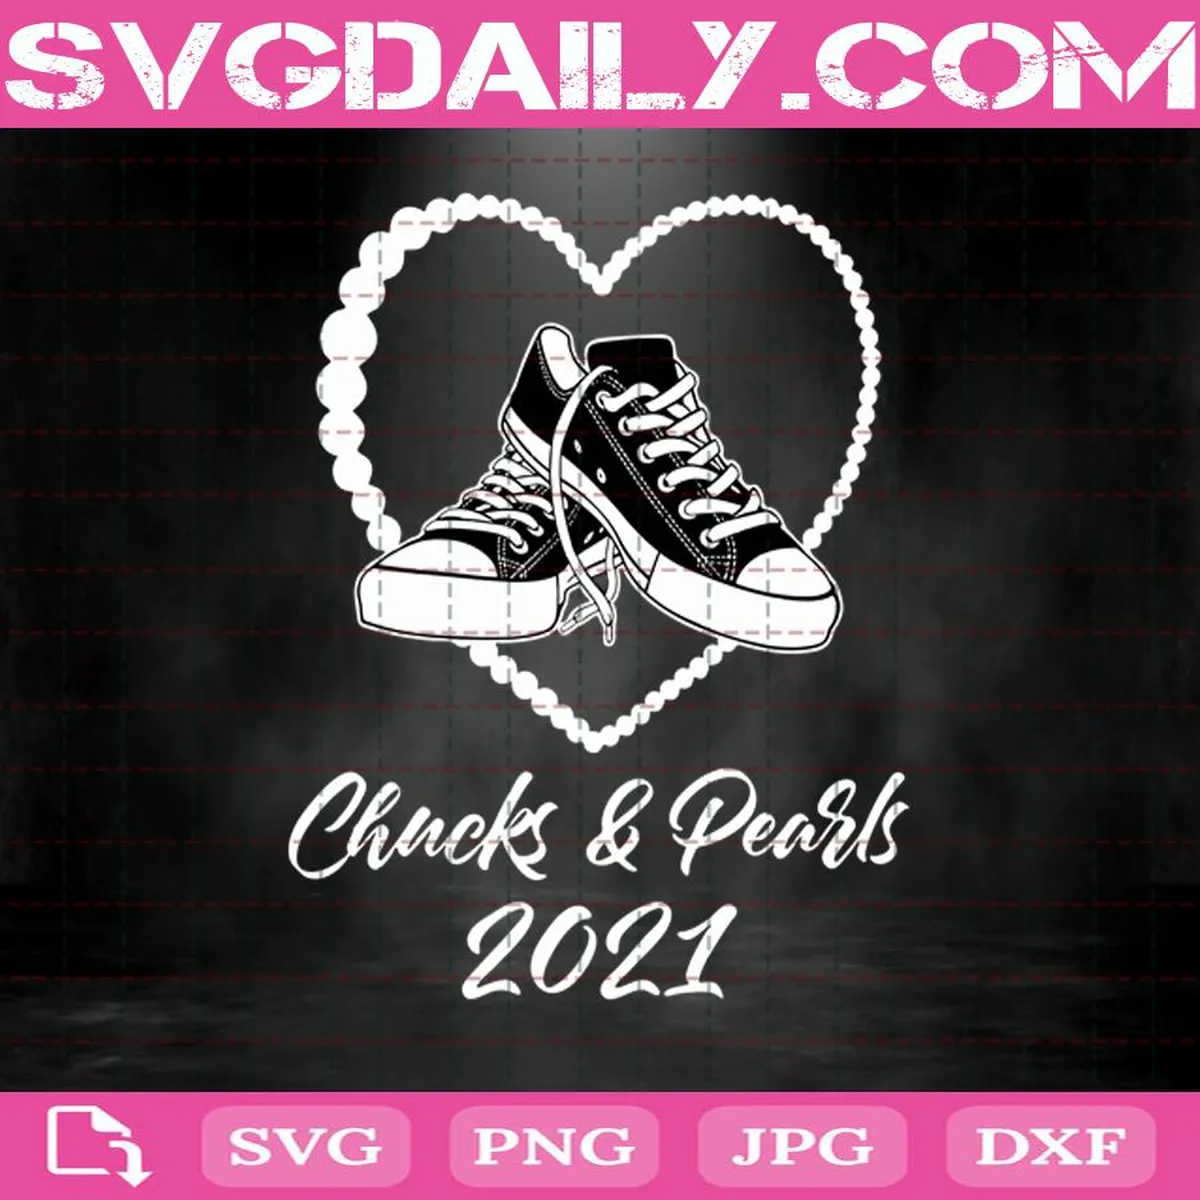 Chucks And Pearls 2021 Svg, Chucks & Pearls Svg, Chucks Svg, Pearls Svg, Shoes Svg, Svg Png Dxf Eps AI Instant Download